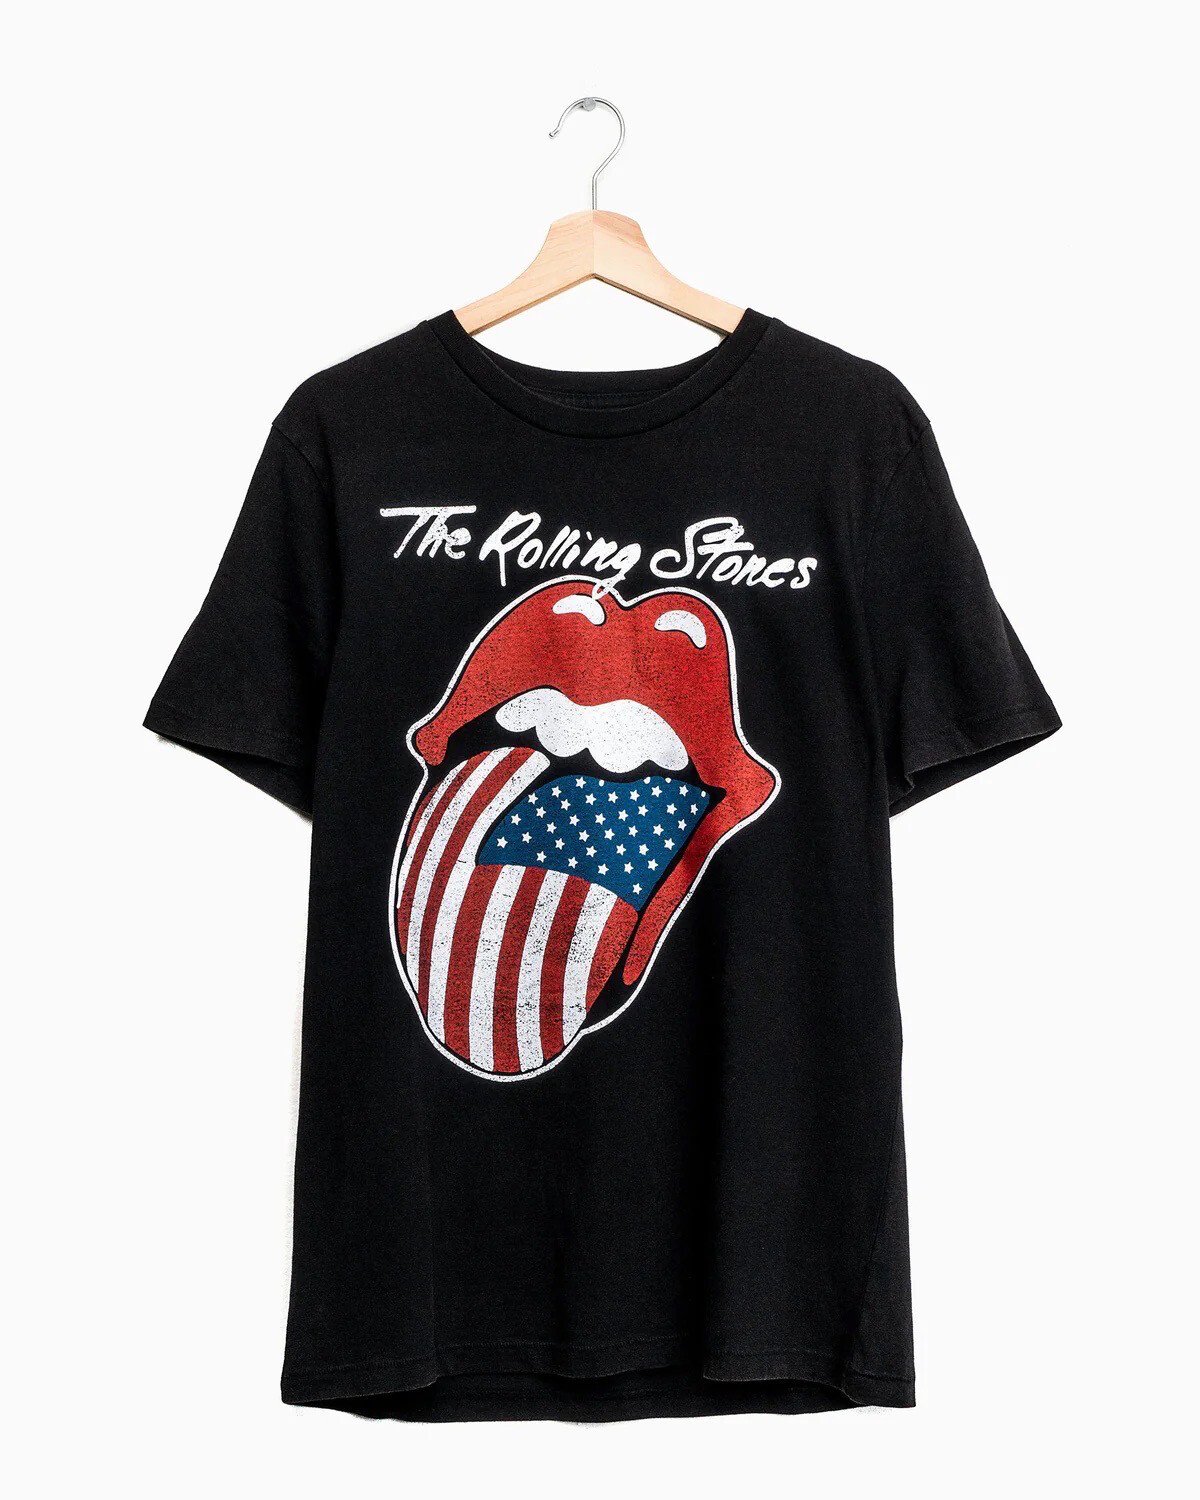 Rolling Stones Thrifted American Flag Shirt